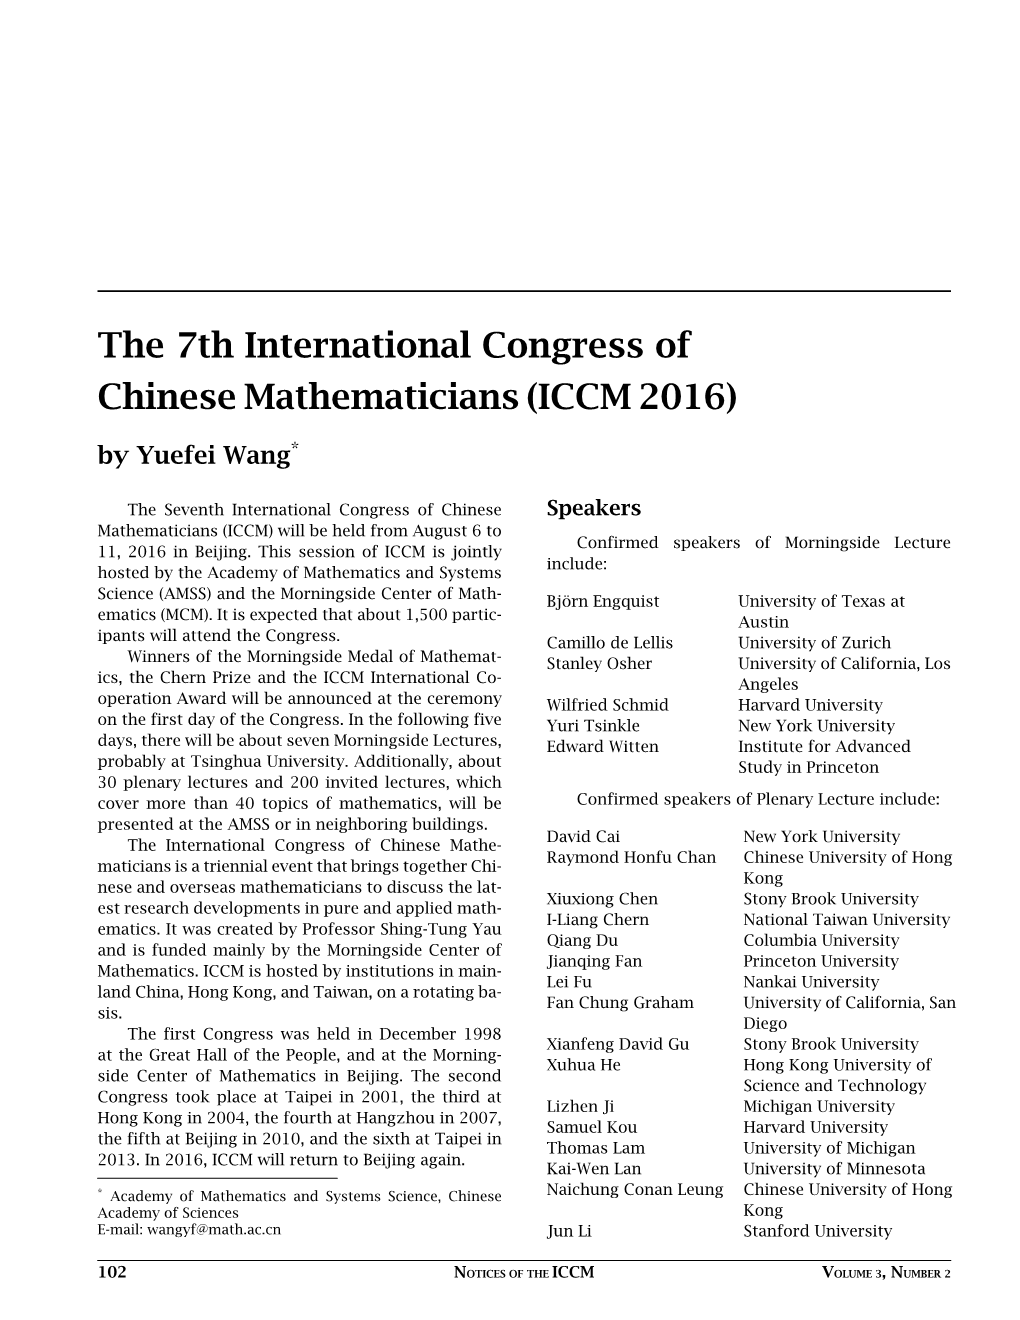 The 7Th International Congress of Chinese Mathematicians (ICCM 2016) by Yuefei Wang*